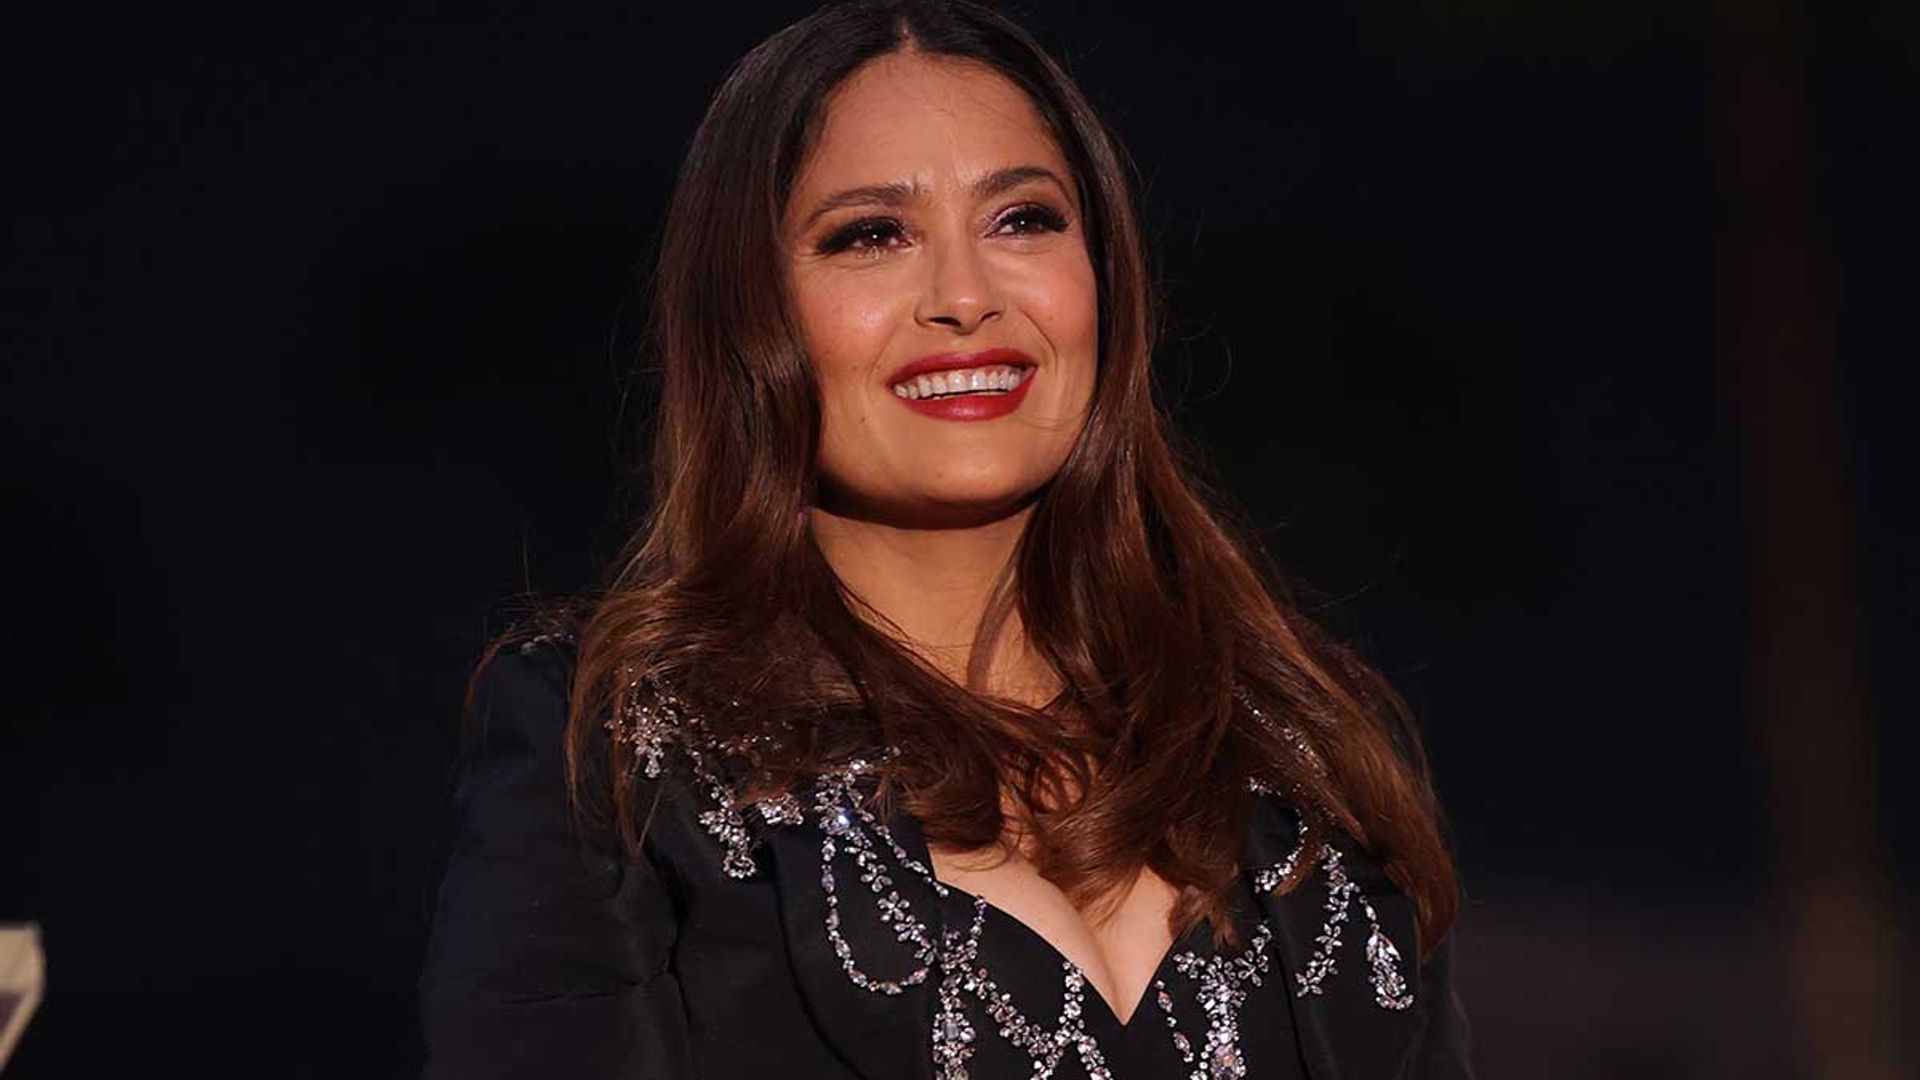 Salma Hayek's daughter steals the show in chic outfit during rare joint appearance